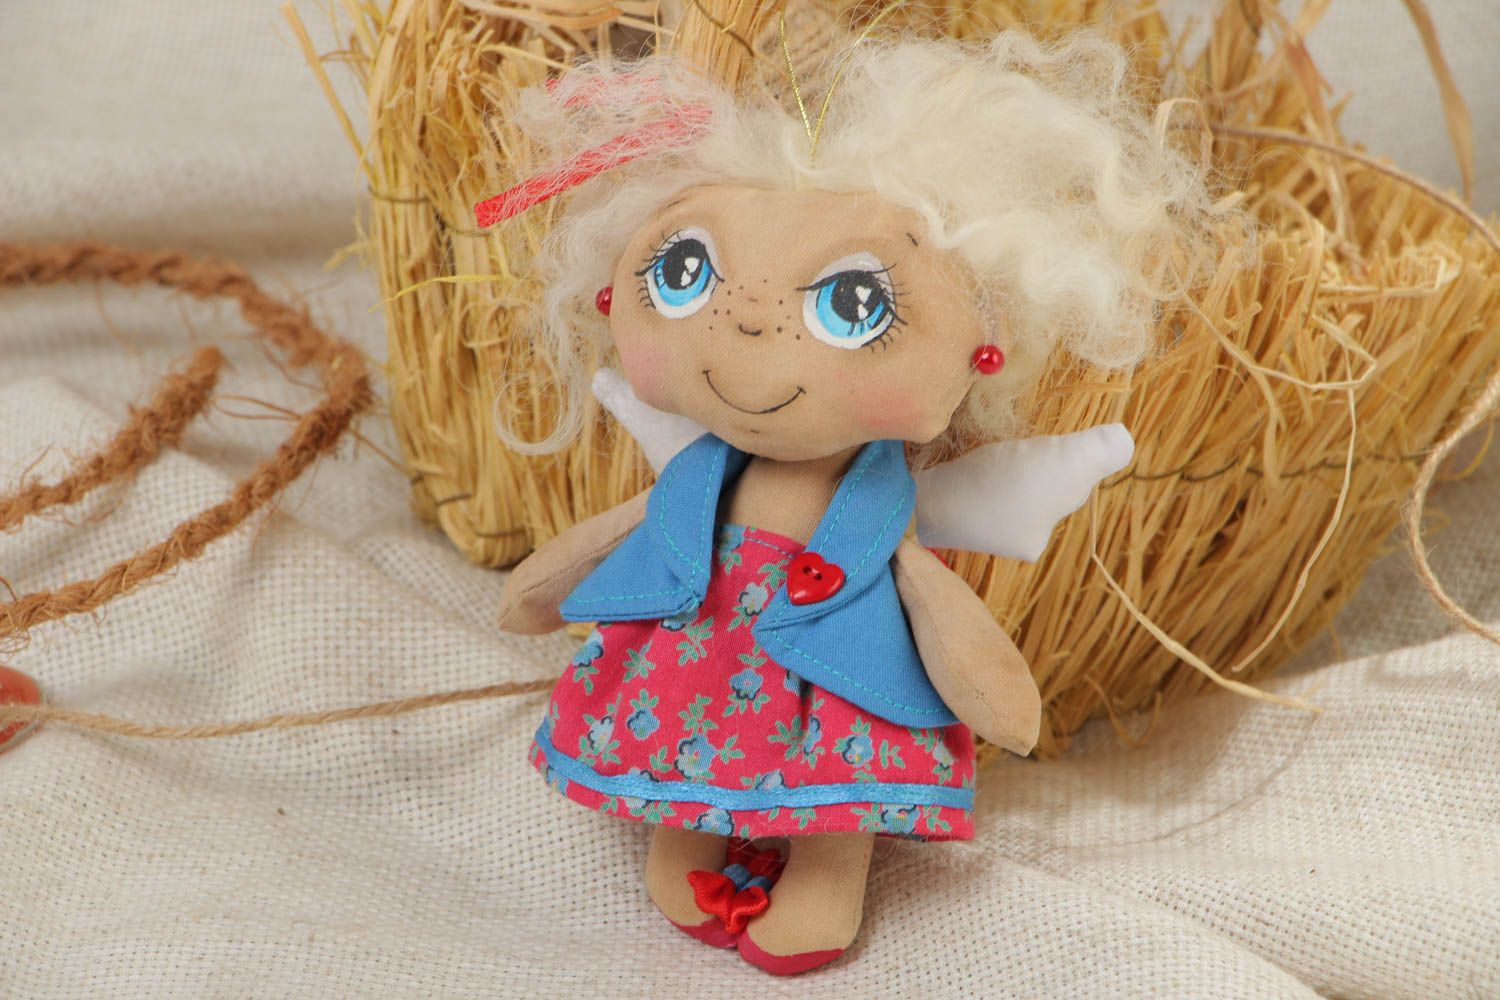 Little handmade painted coffee doll made of cotton fabric with coffee aroma photo 1